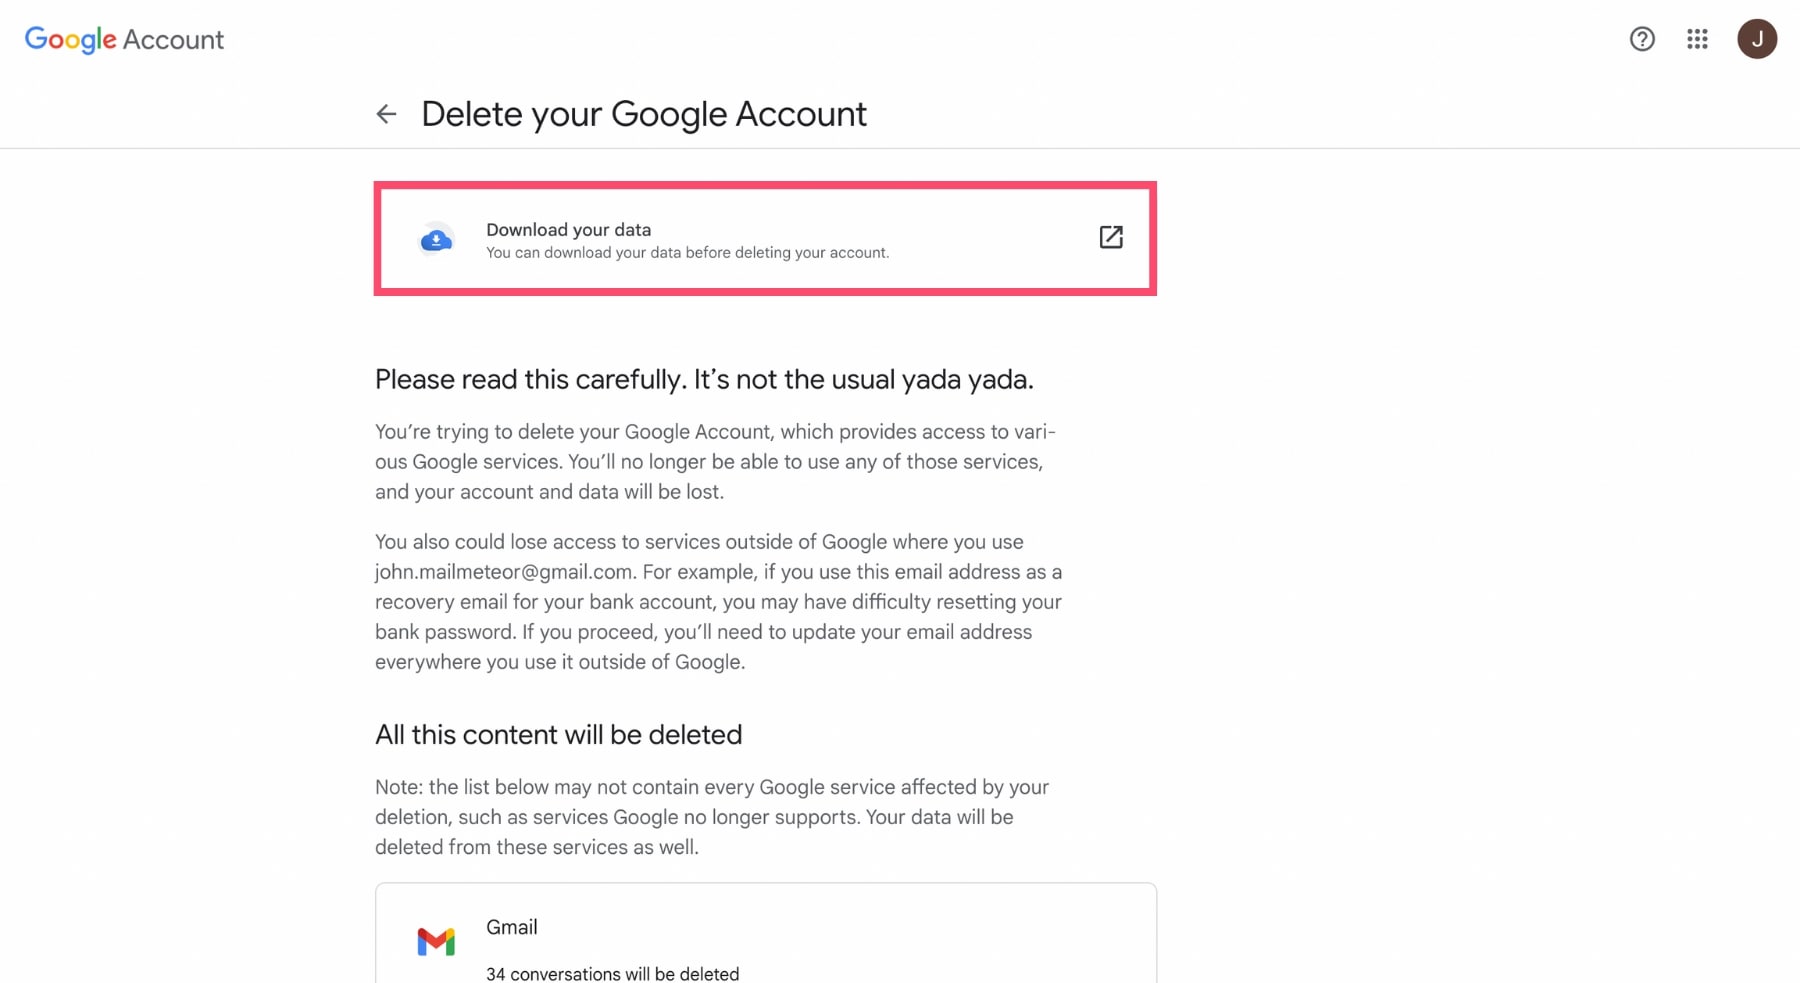 Step-by-Step Guide on How to Delete Your Google Account - Deactivating Your Google Account